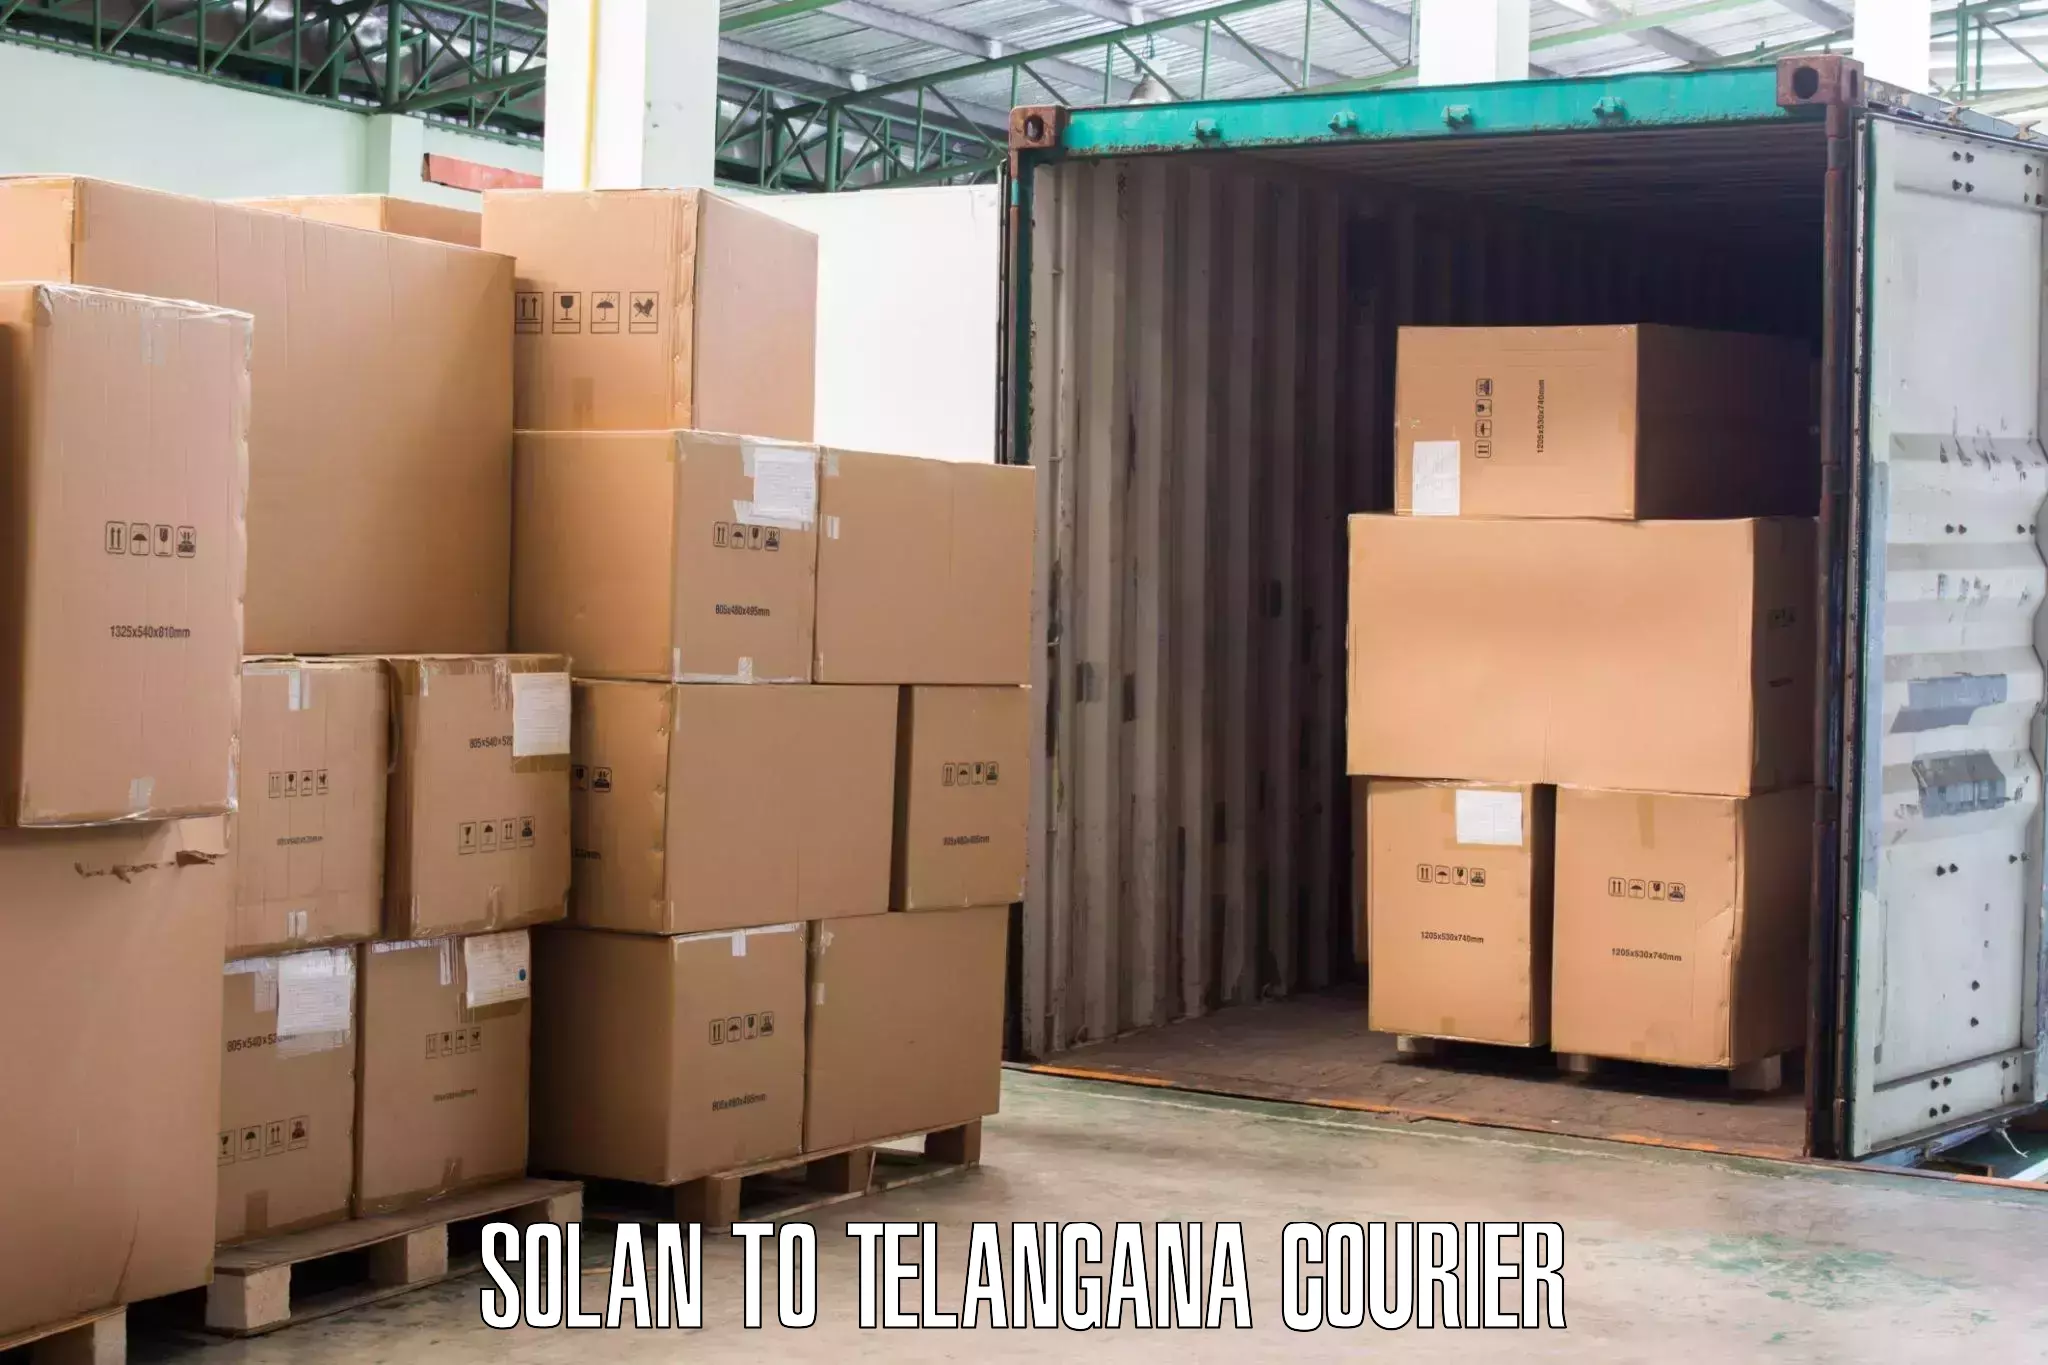 Advanced relocation solutions Solan to Hyderabad